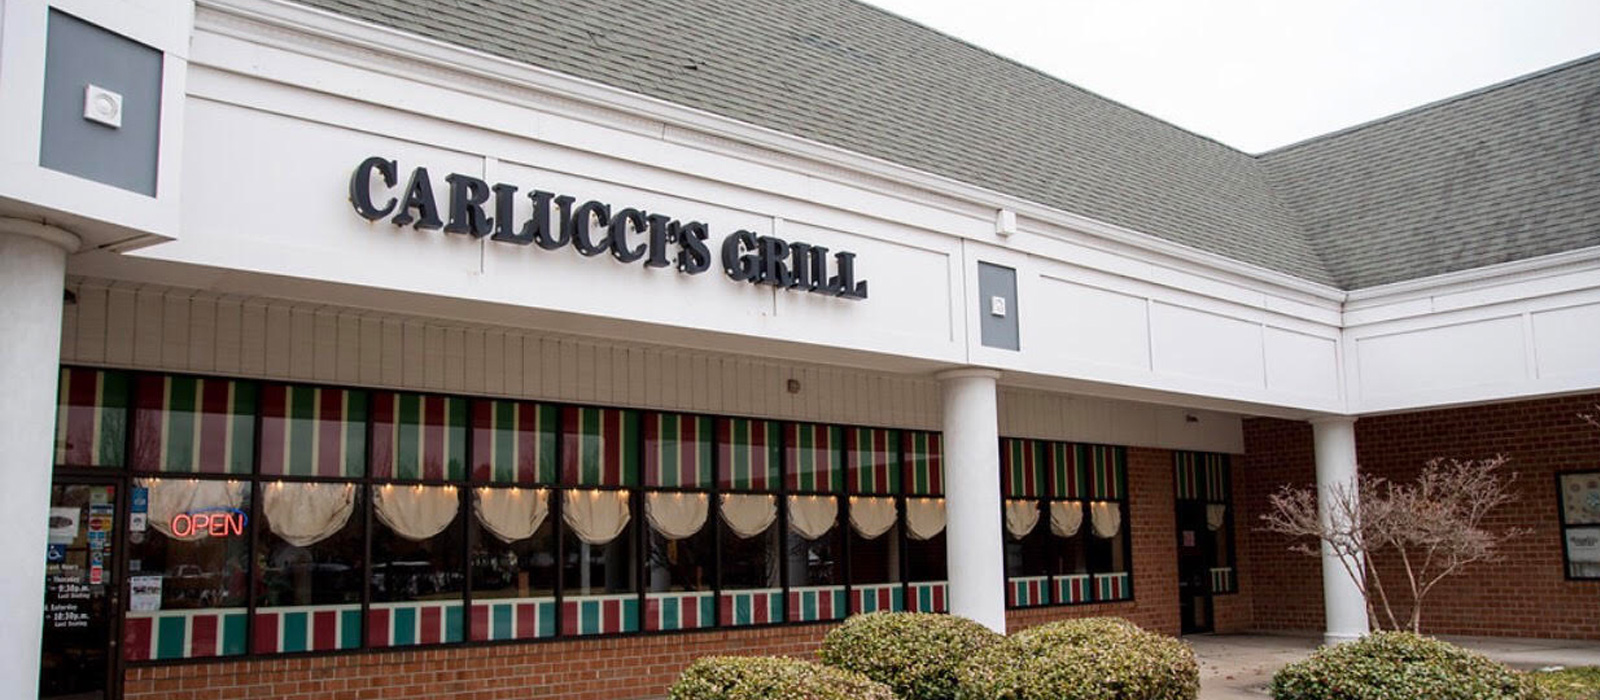 Carluccis Grill West Windsor Location Store Front